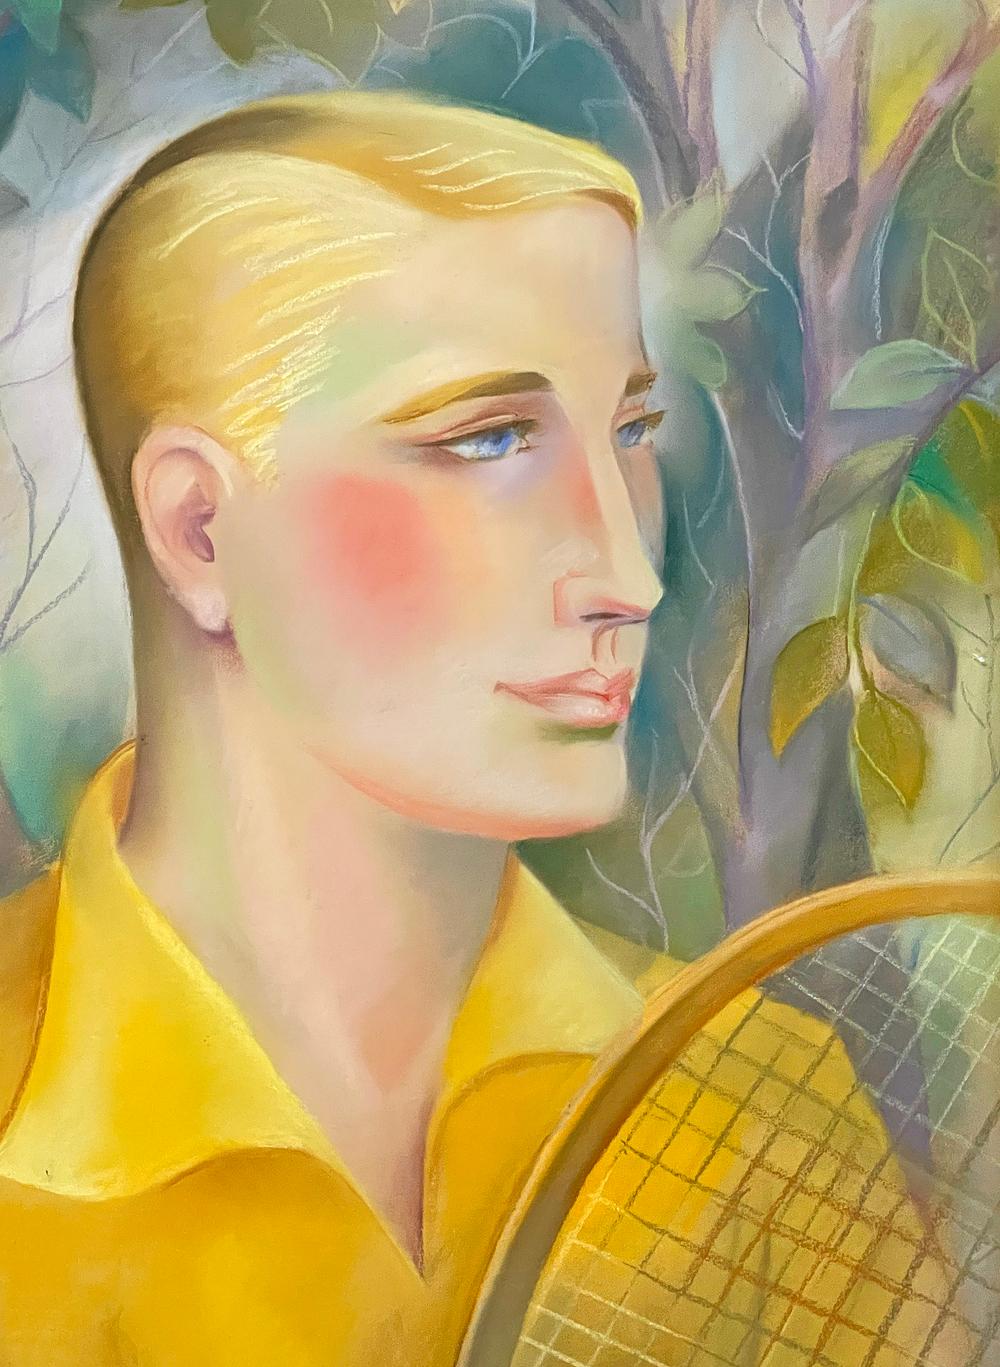 This striking portrait of a sophisticated, beautifully groomed young man holding a tennis racket, his straw-colored hair beautifully echoed and emphasized by his canary-yellow shirt, his cheeks ruddy from the sun and his eyelids heavy from the heat